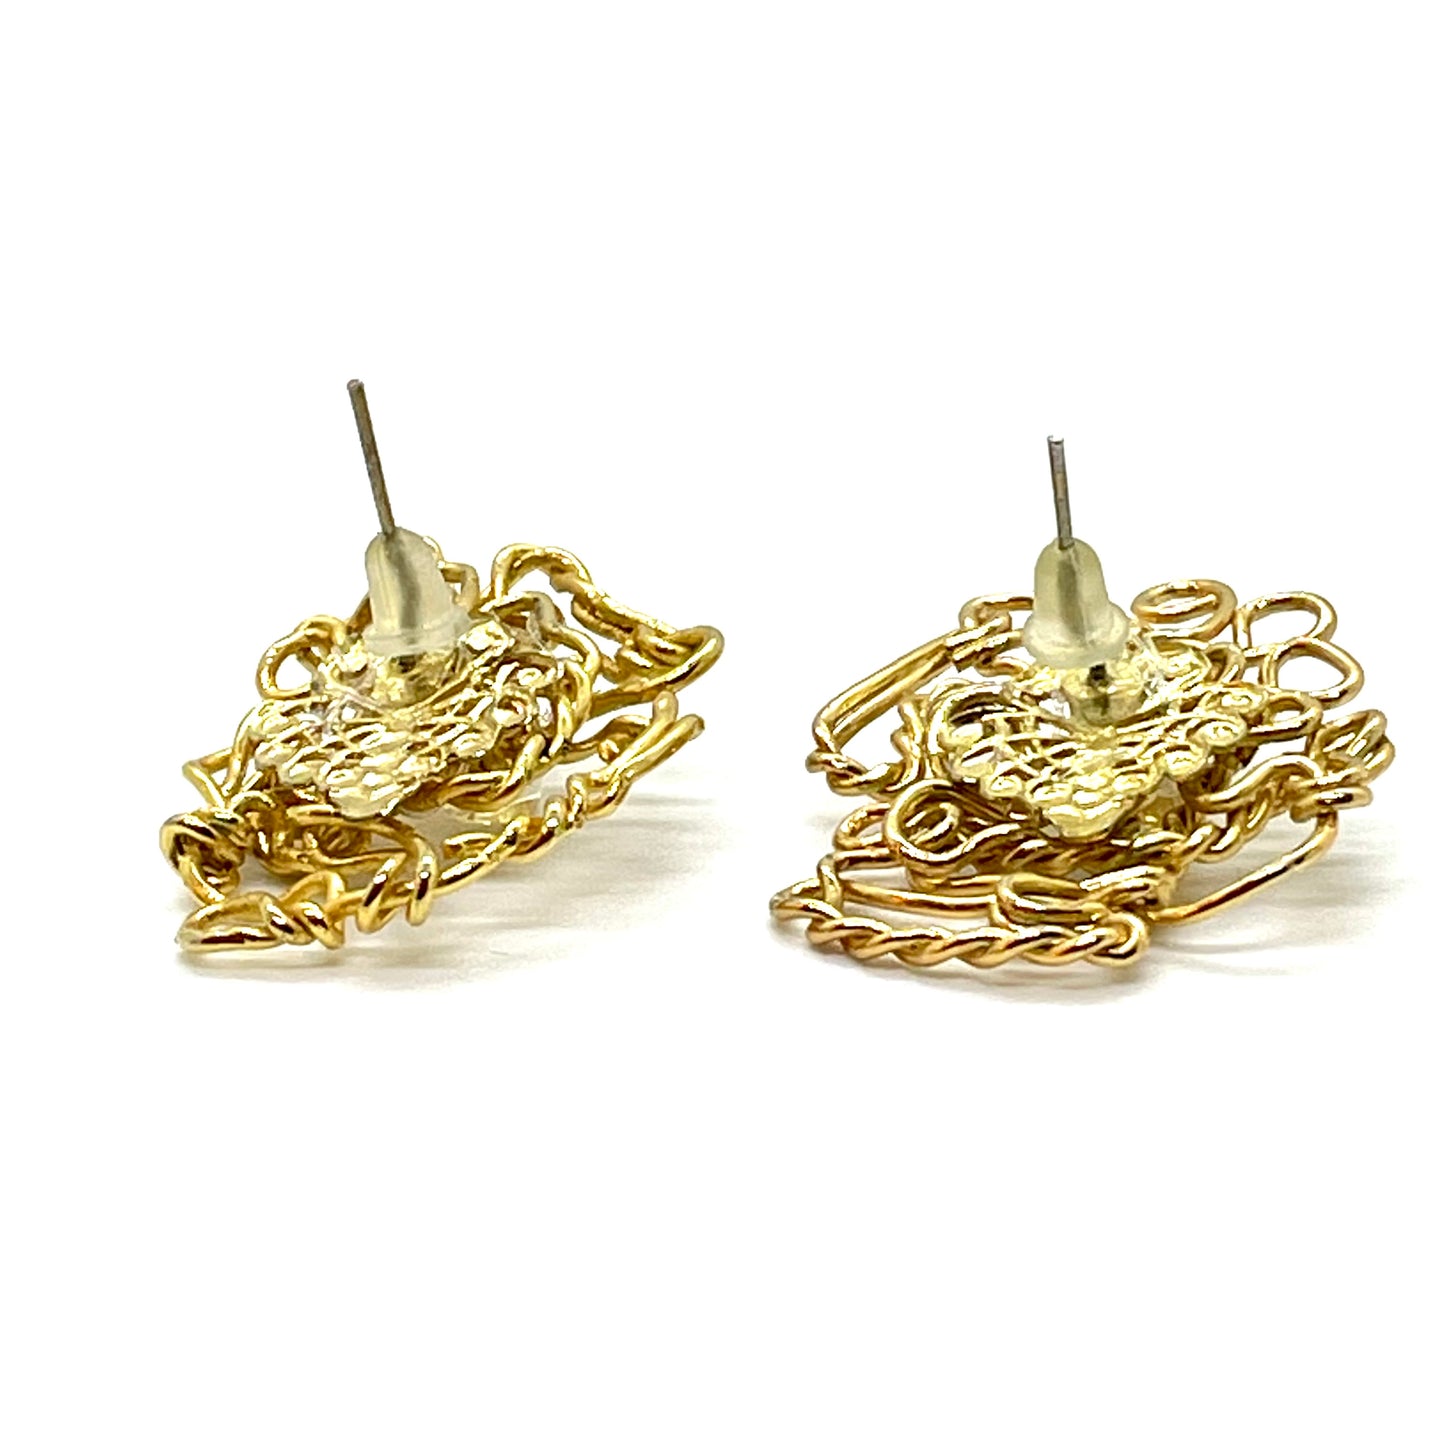 MUSE GOLD earrings with pusher